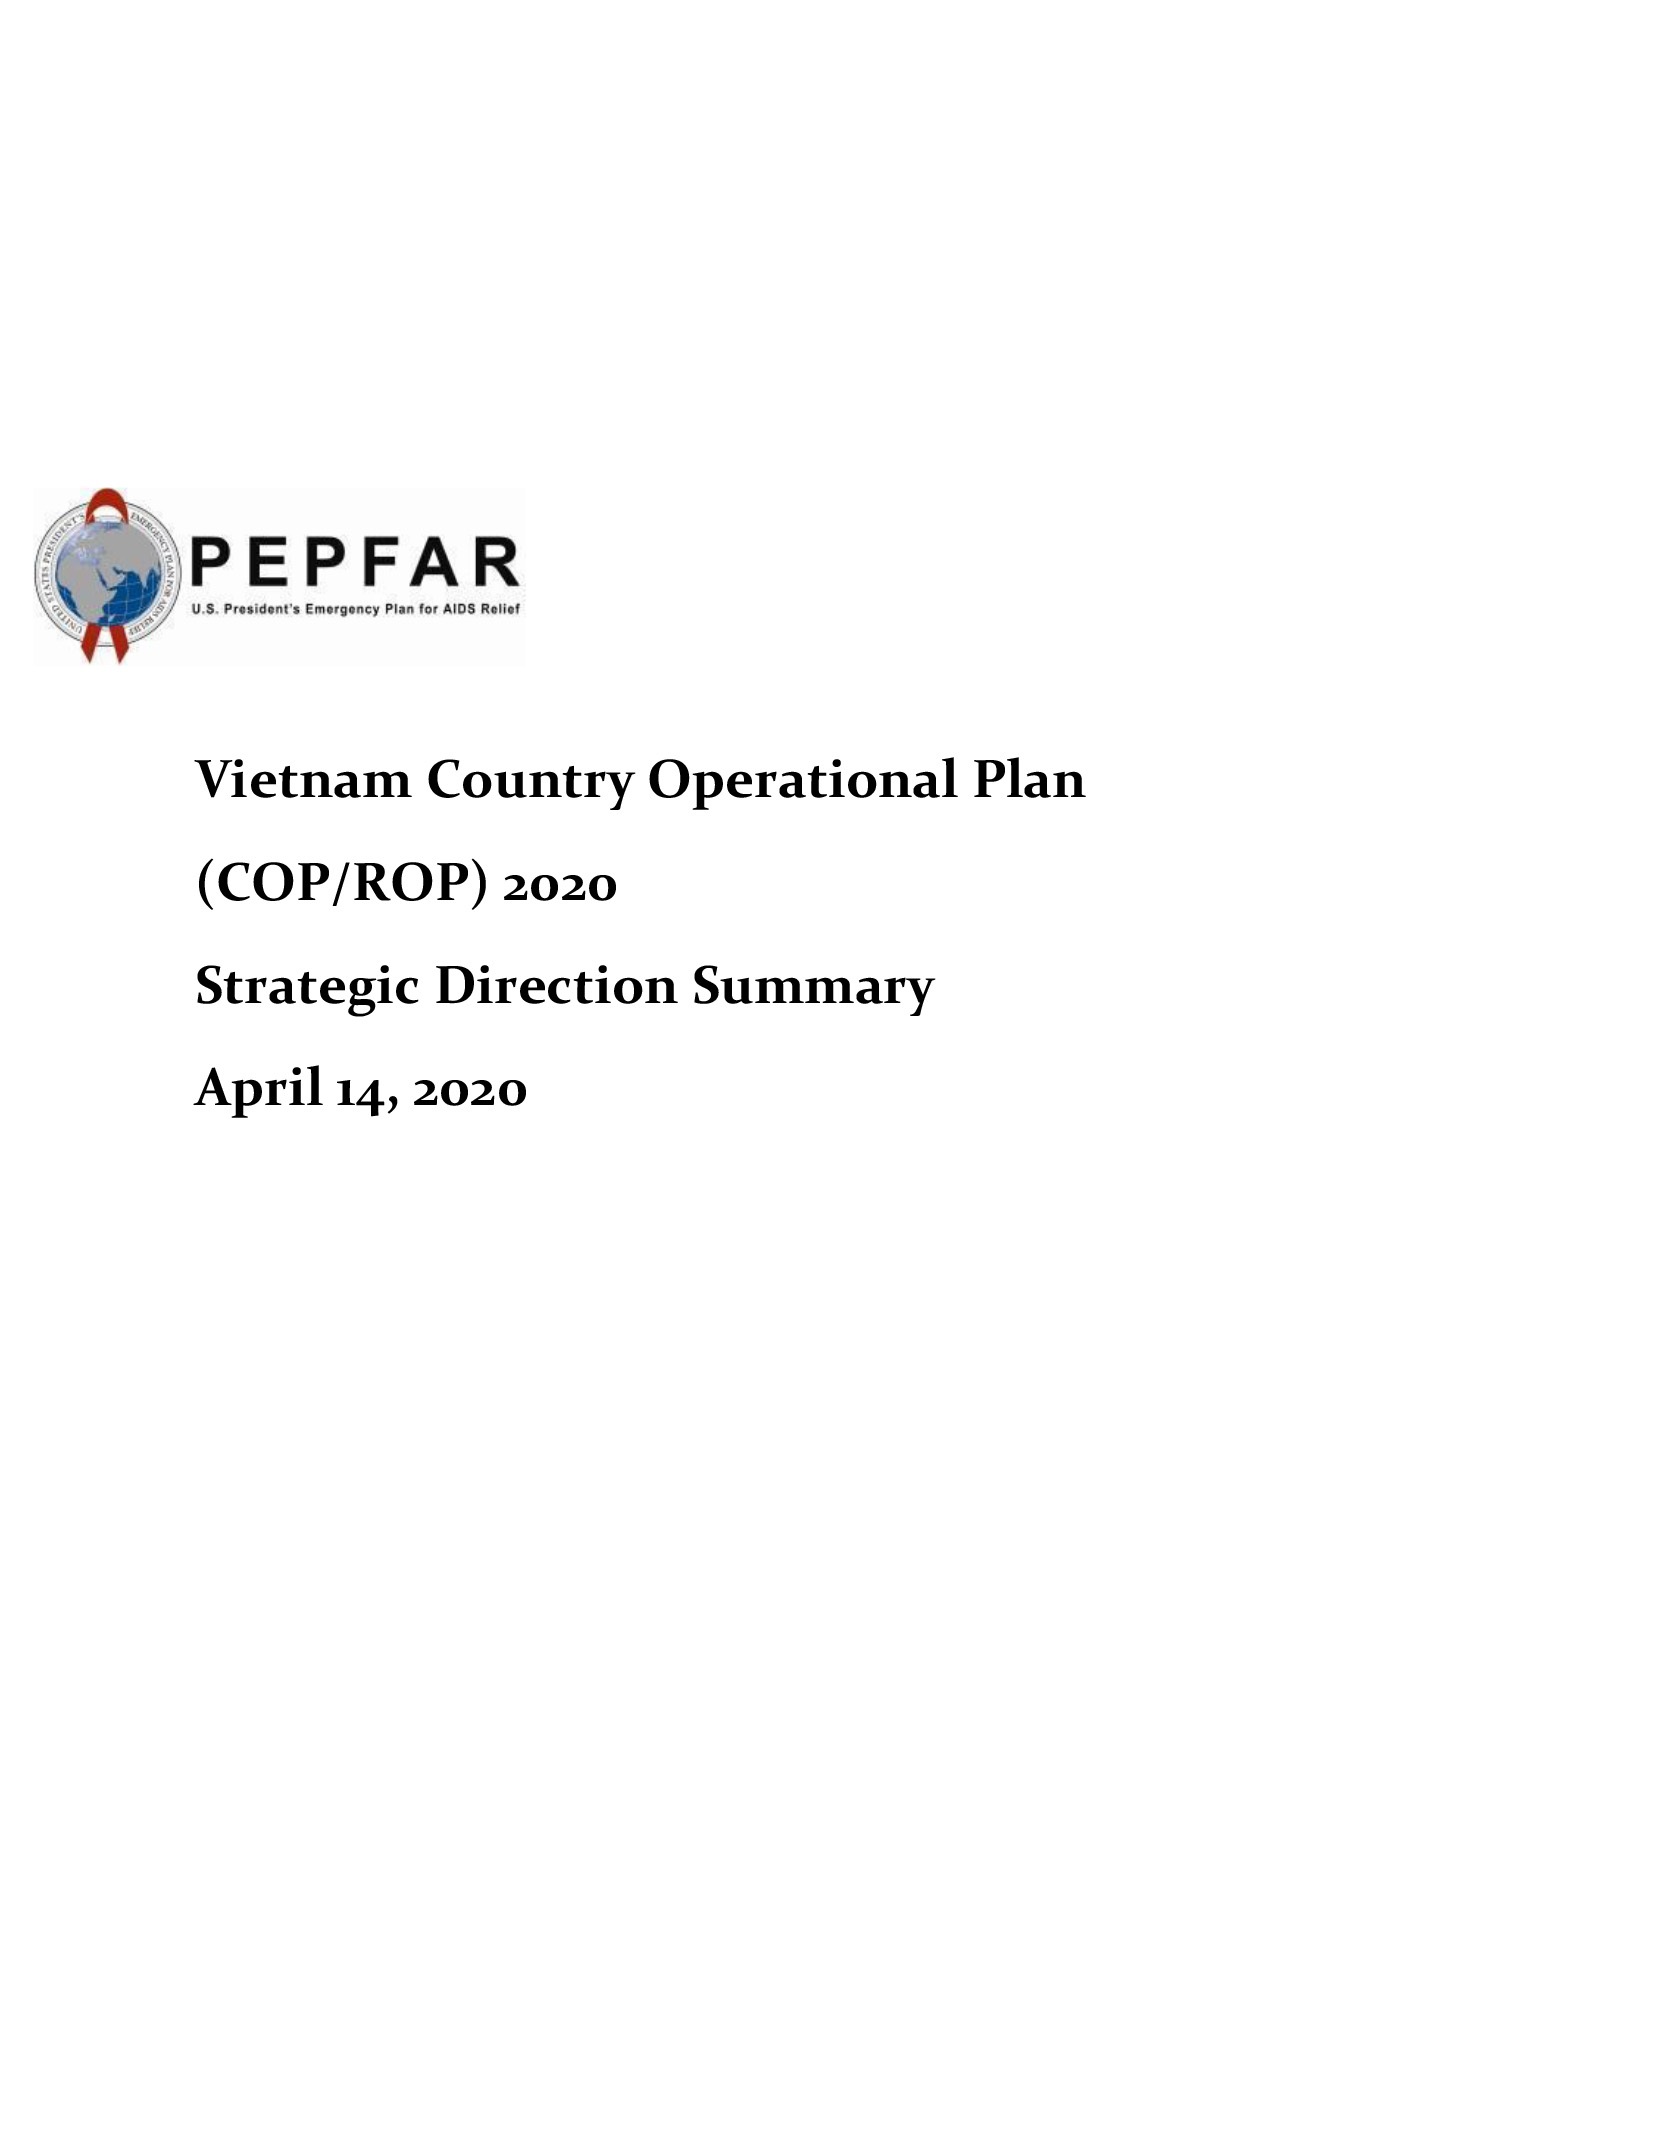 U.S. President’s Emergency Plan for AIDS Relief/Vietnam country operational plan 2020: Strategic direction summary (Vietnam) 